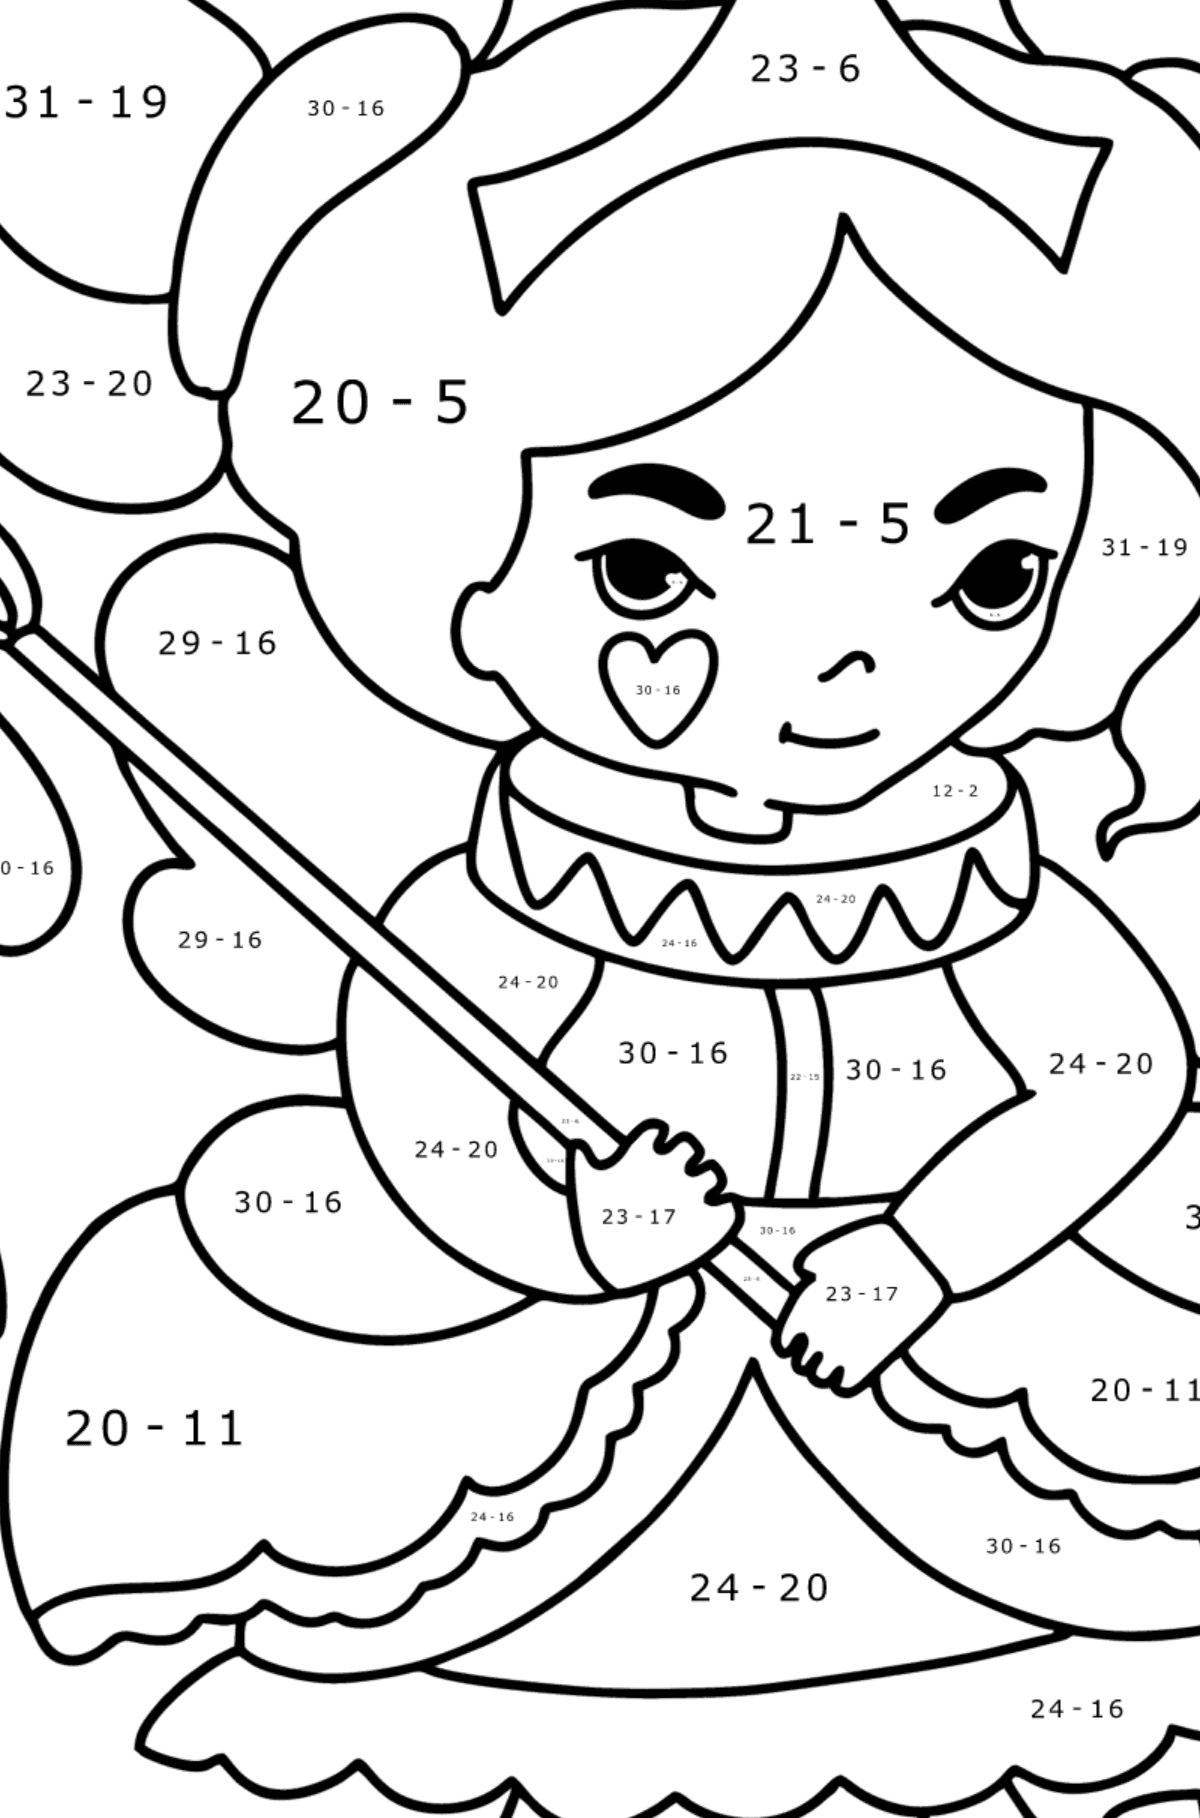 Fairy in a beautiful dress coloring page - Math Coloring - Subtraction for Kids